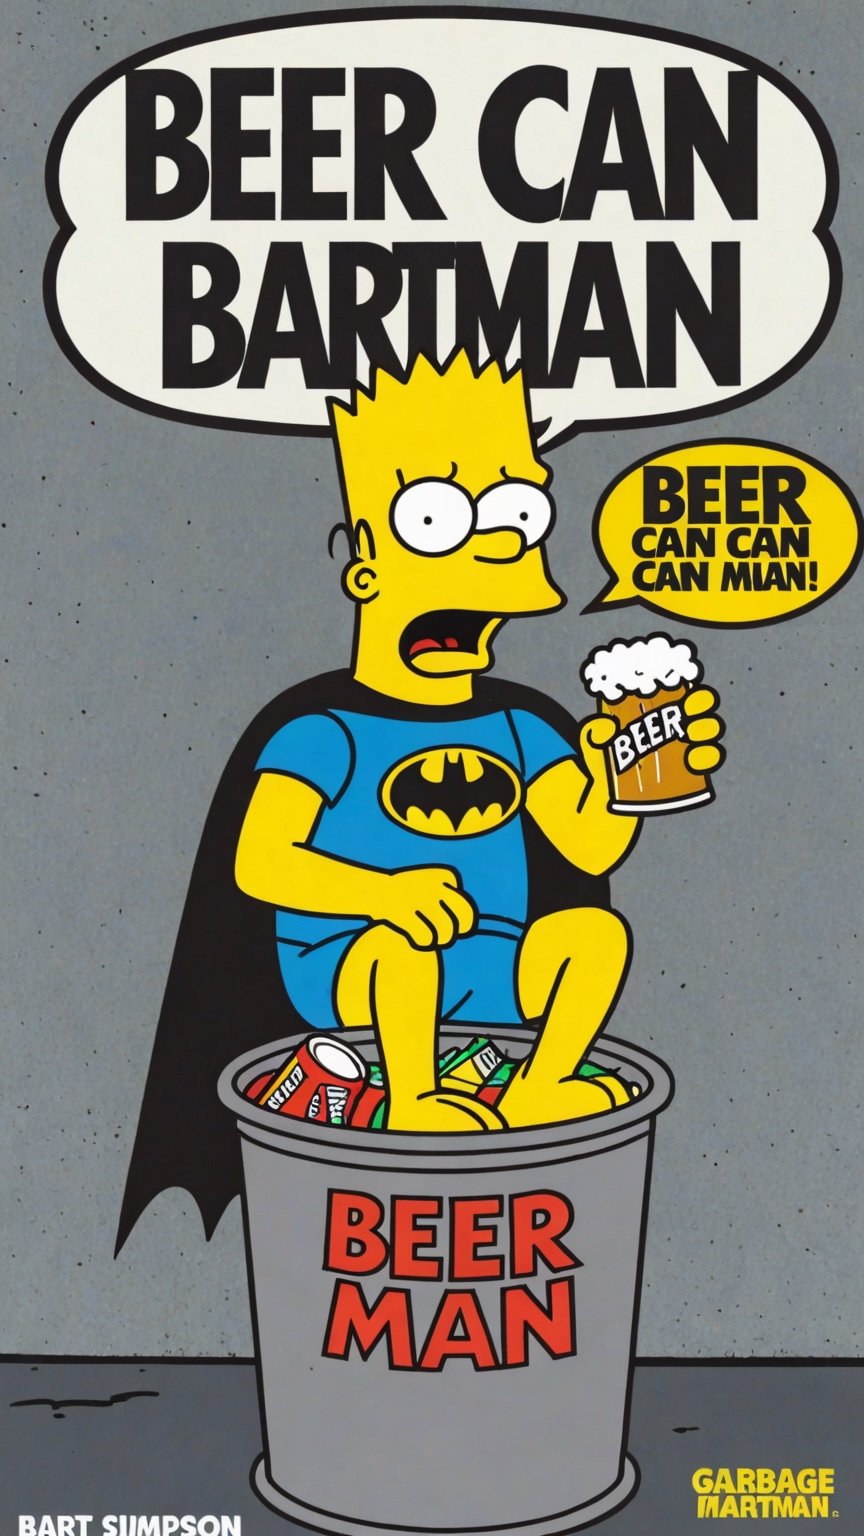 Photo of Bart Simpson as batman in garbage can with text bubble that says "Beer can Bart man"